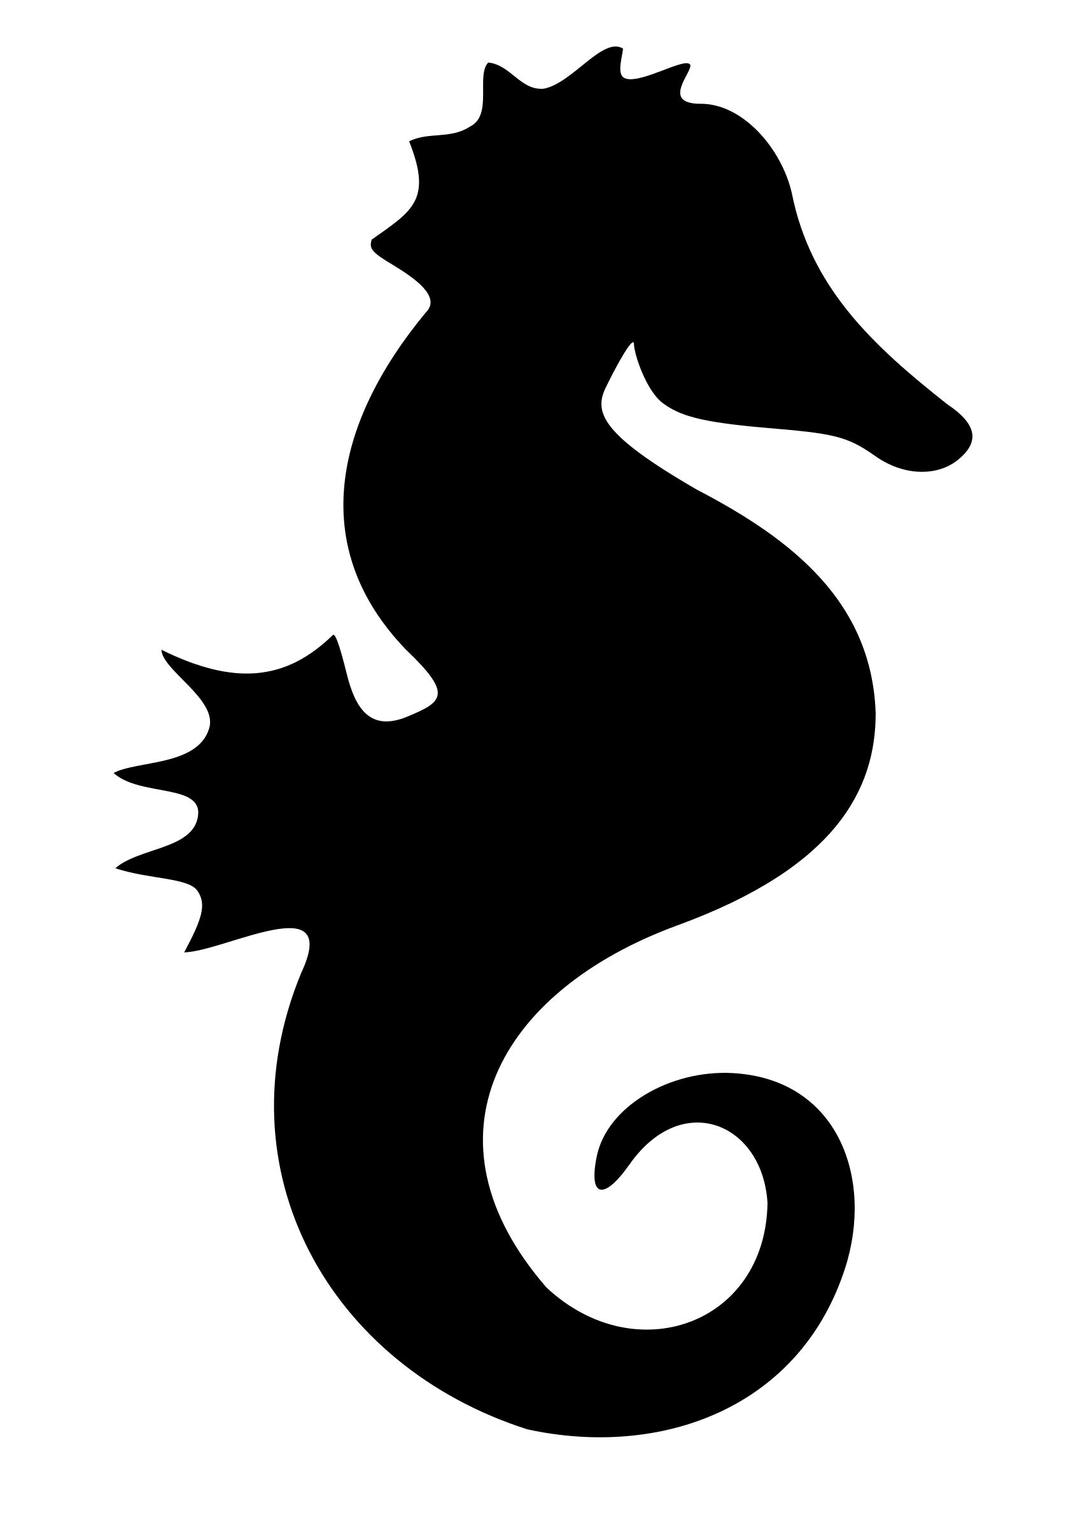 Seahorse Silhouette png transparent